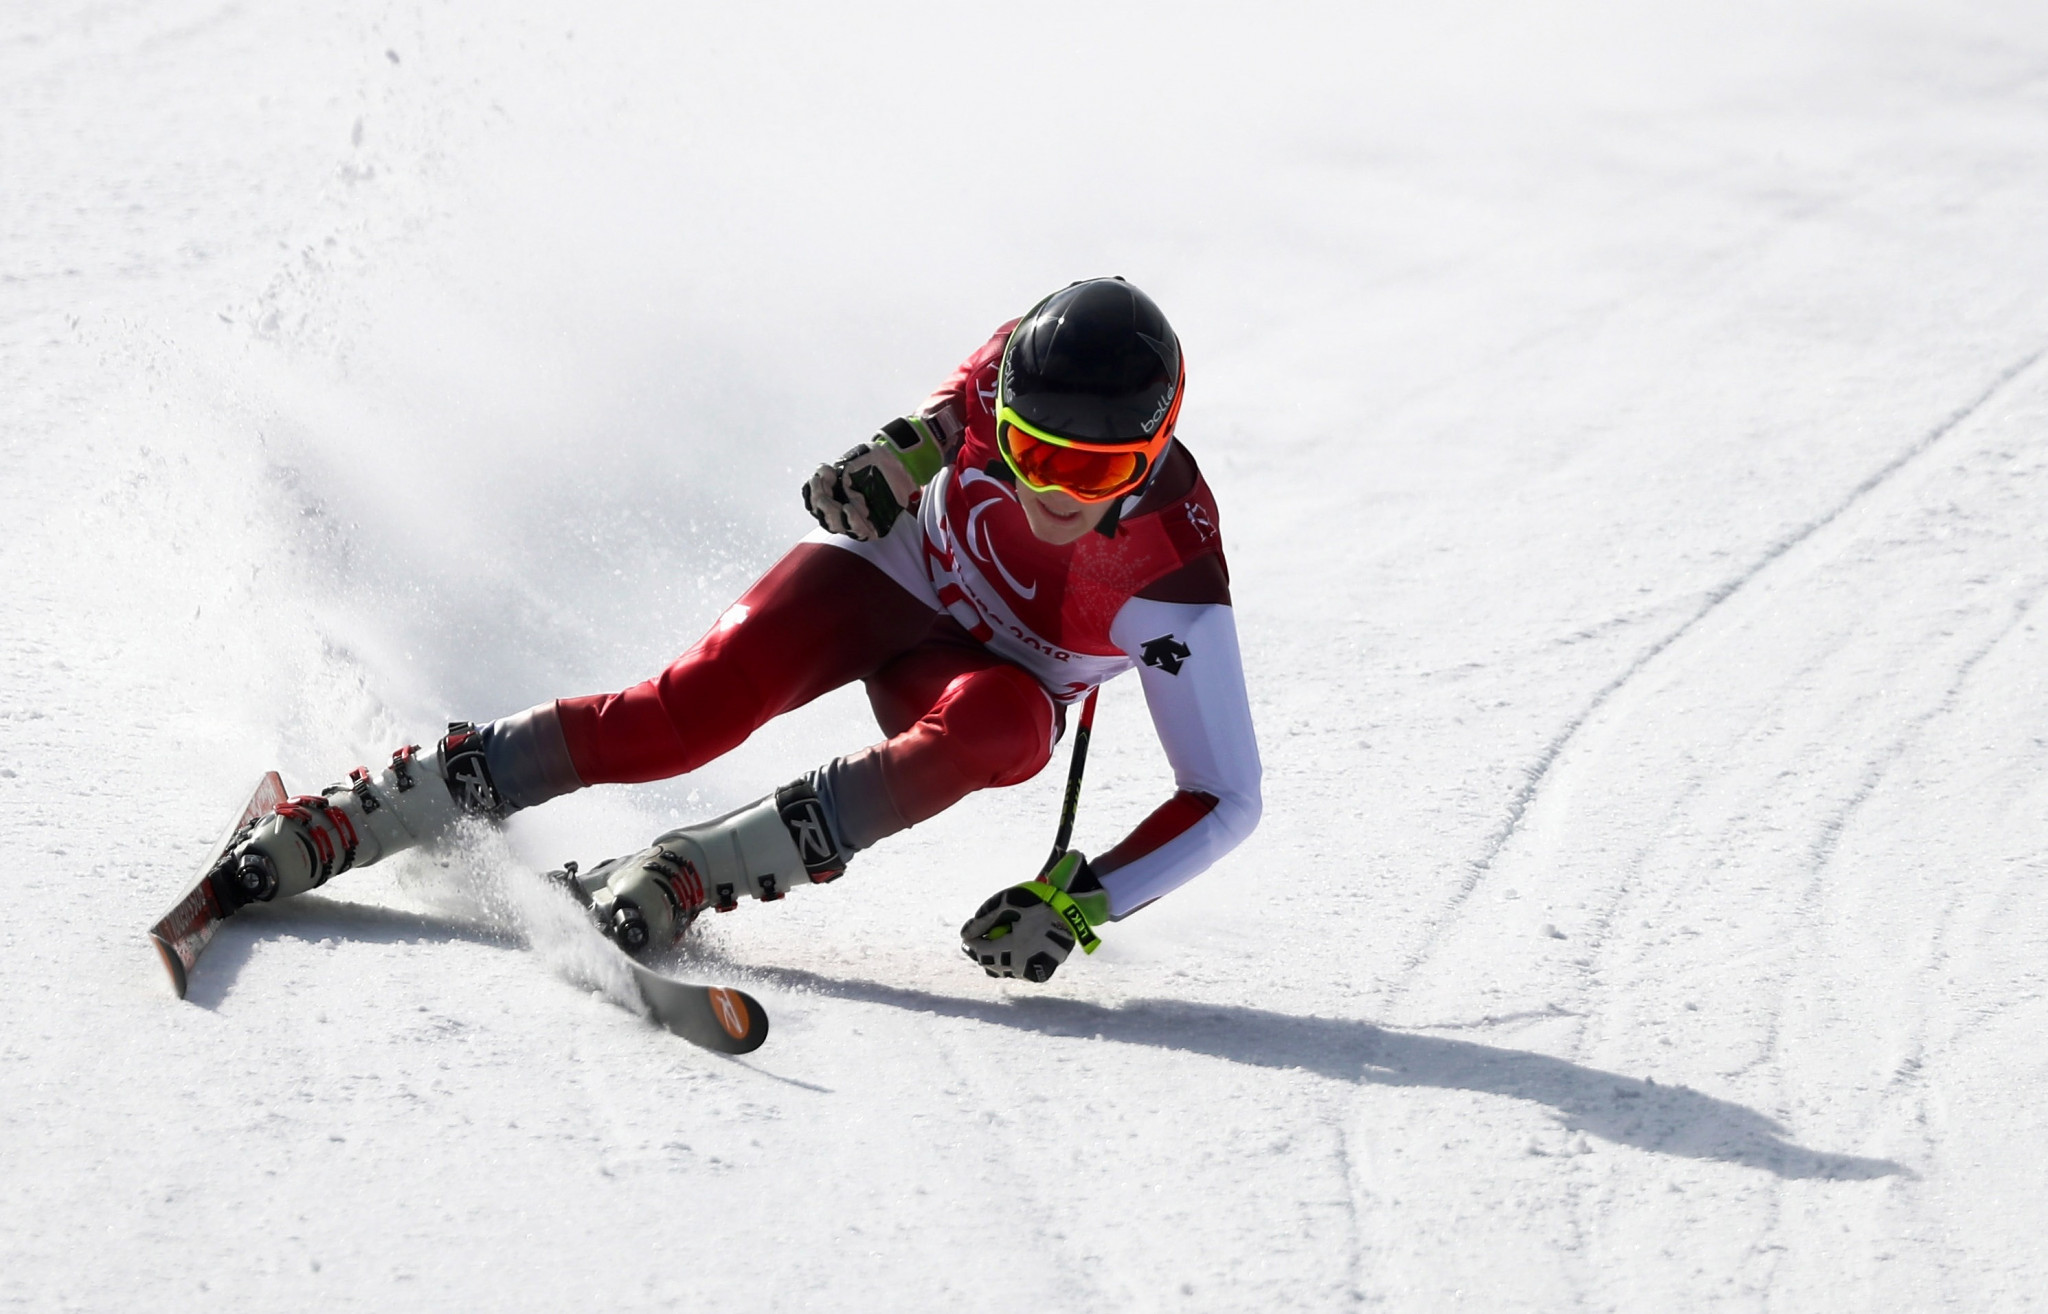 Switzerland's Theo Gmur proved too strong for the opposition in the men's standing competition ©Getty Images